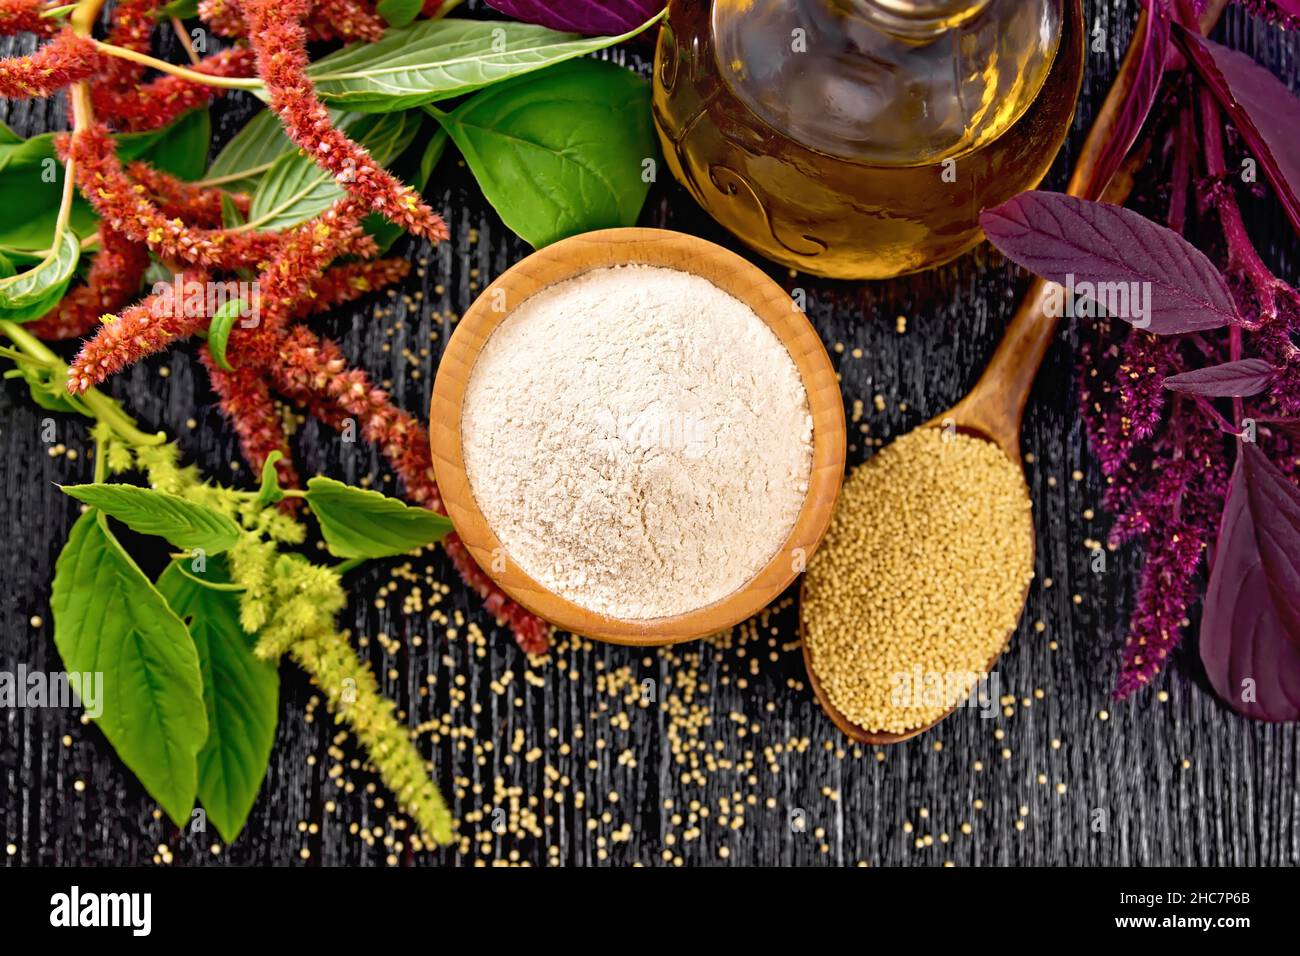 Amaranth flour in a bowl, seeds in a spoon and oil in decanter, brown, green and purple flowers of plant on black wooden board background from above Stock Photo